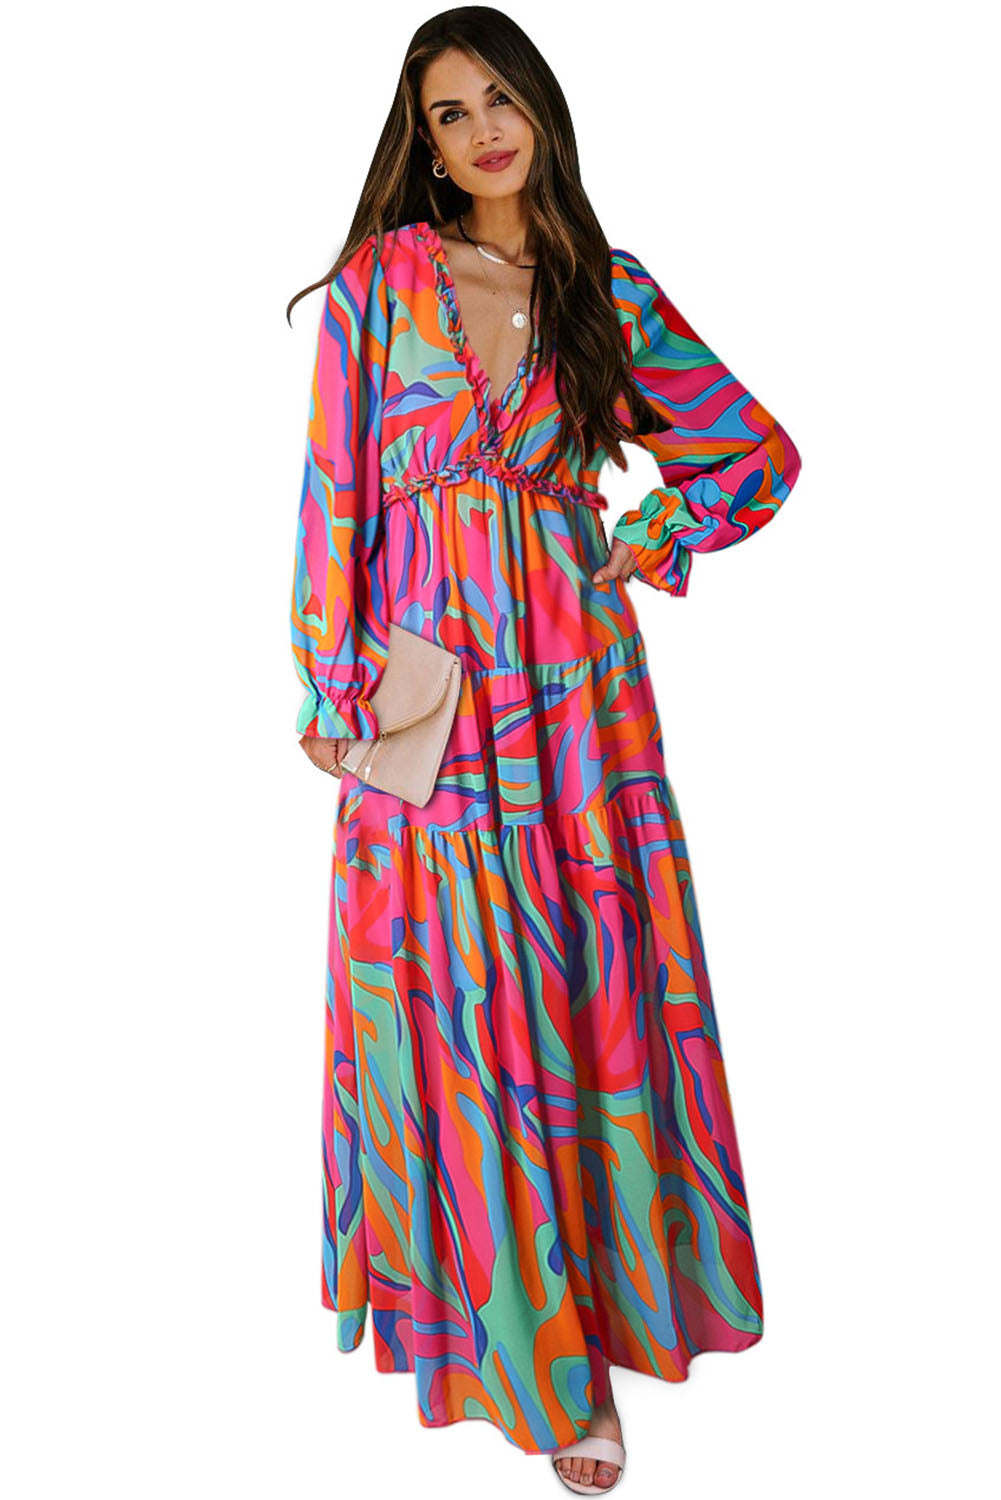 Pastel Red Floral Print Ruffle Trim Plunge Neckline Maxi Dress - Cowtown Bling N Things